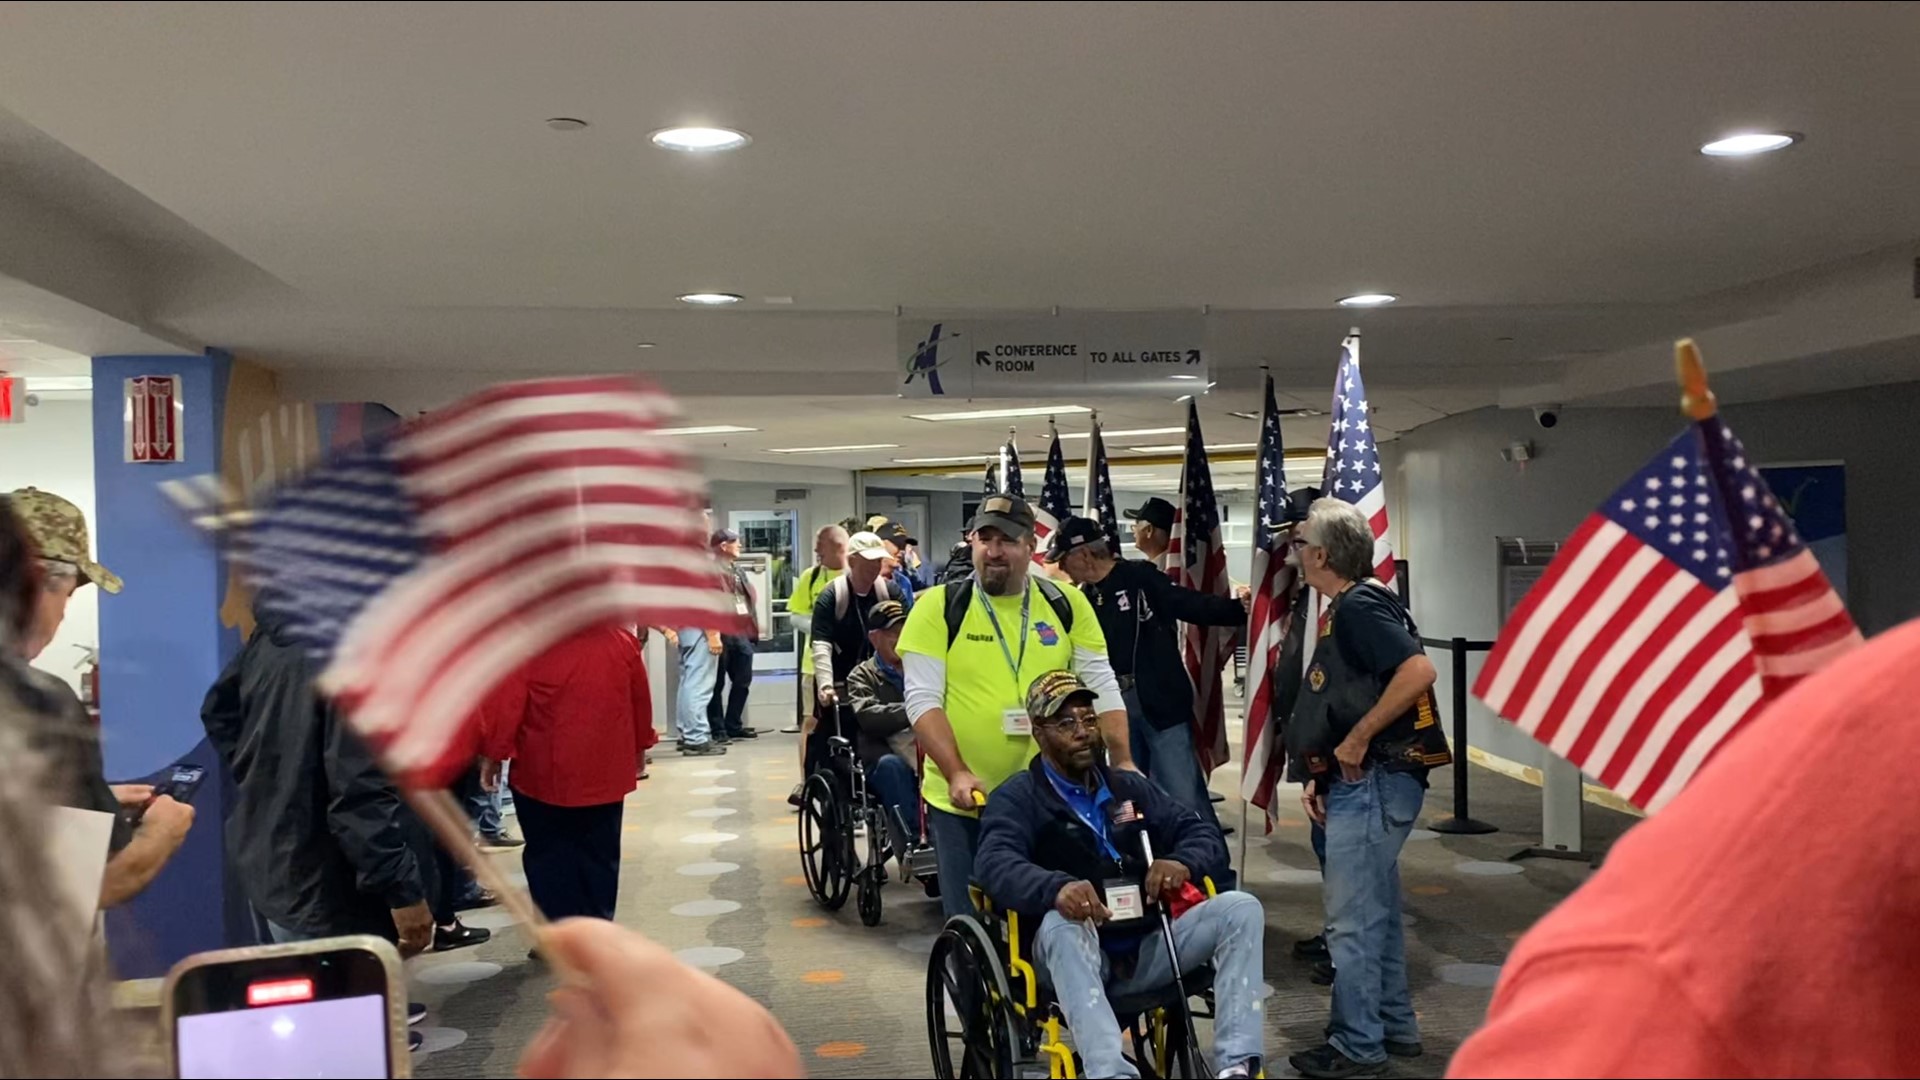 Several folks lined up to greet the veterans ahead of the honor flight.